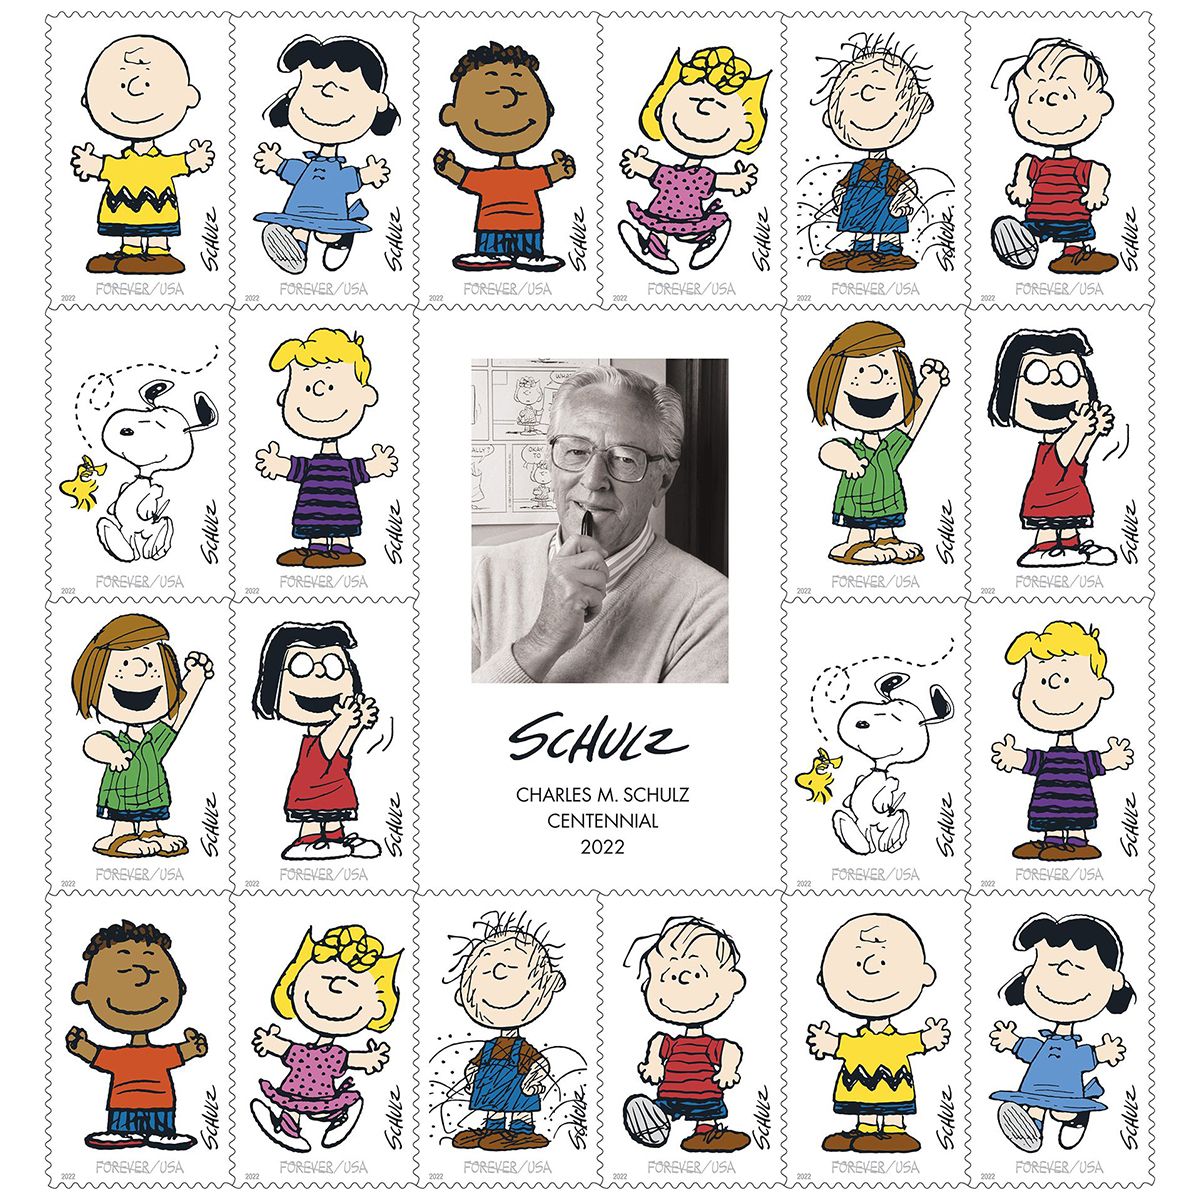 Image of a sheet of Peanuts themed stamps